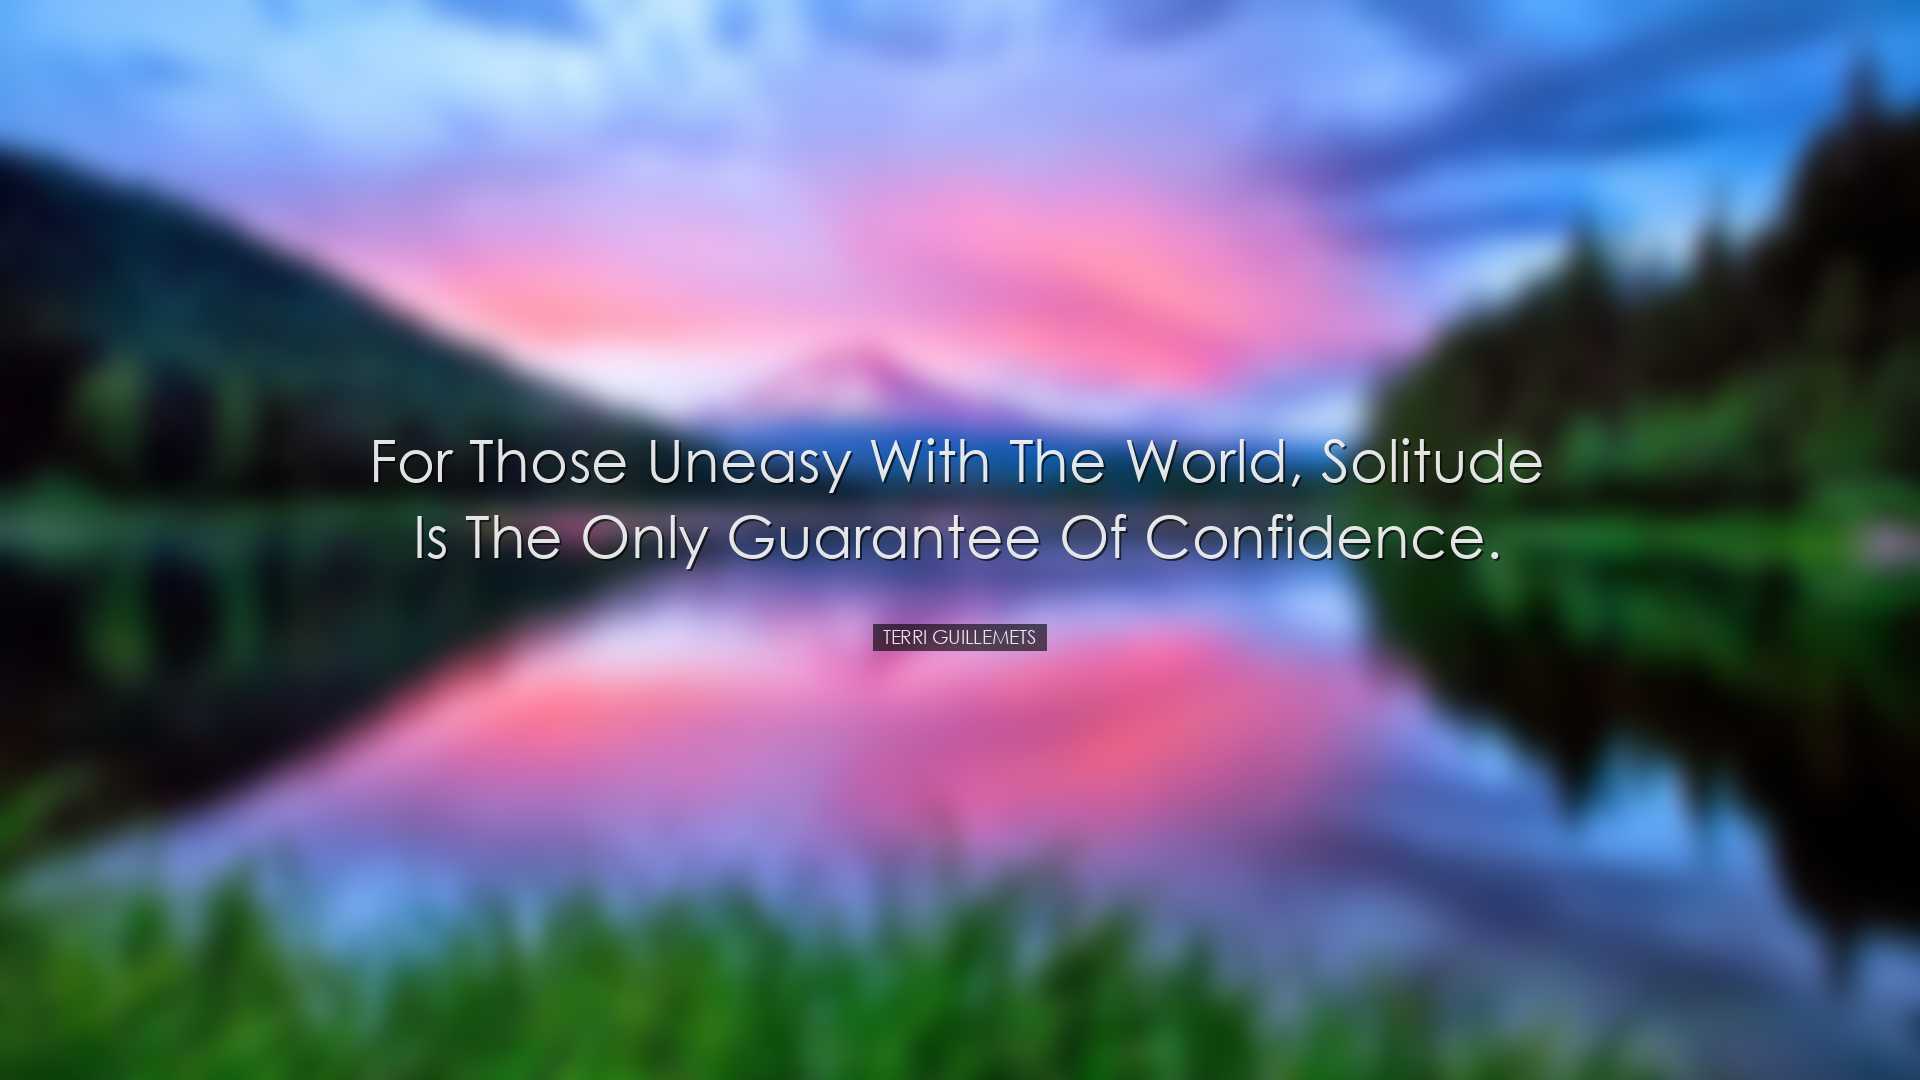 For those uneasy with the world, solitude is the only guarantee of